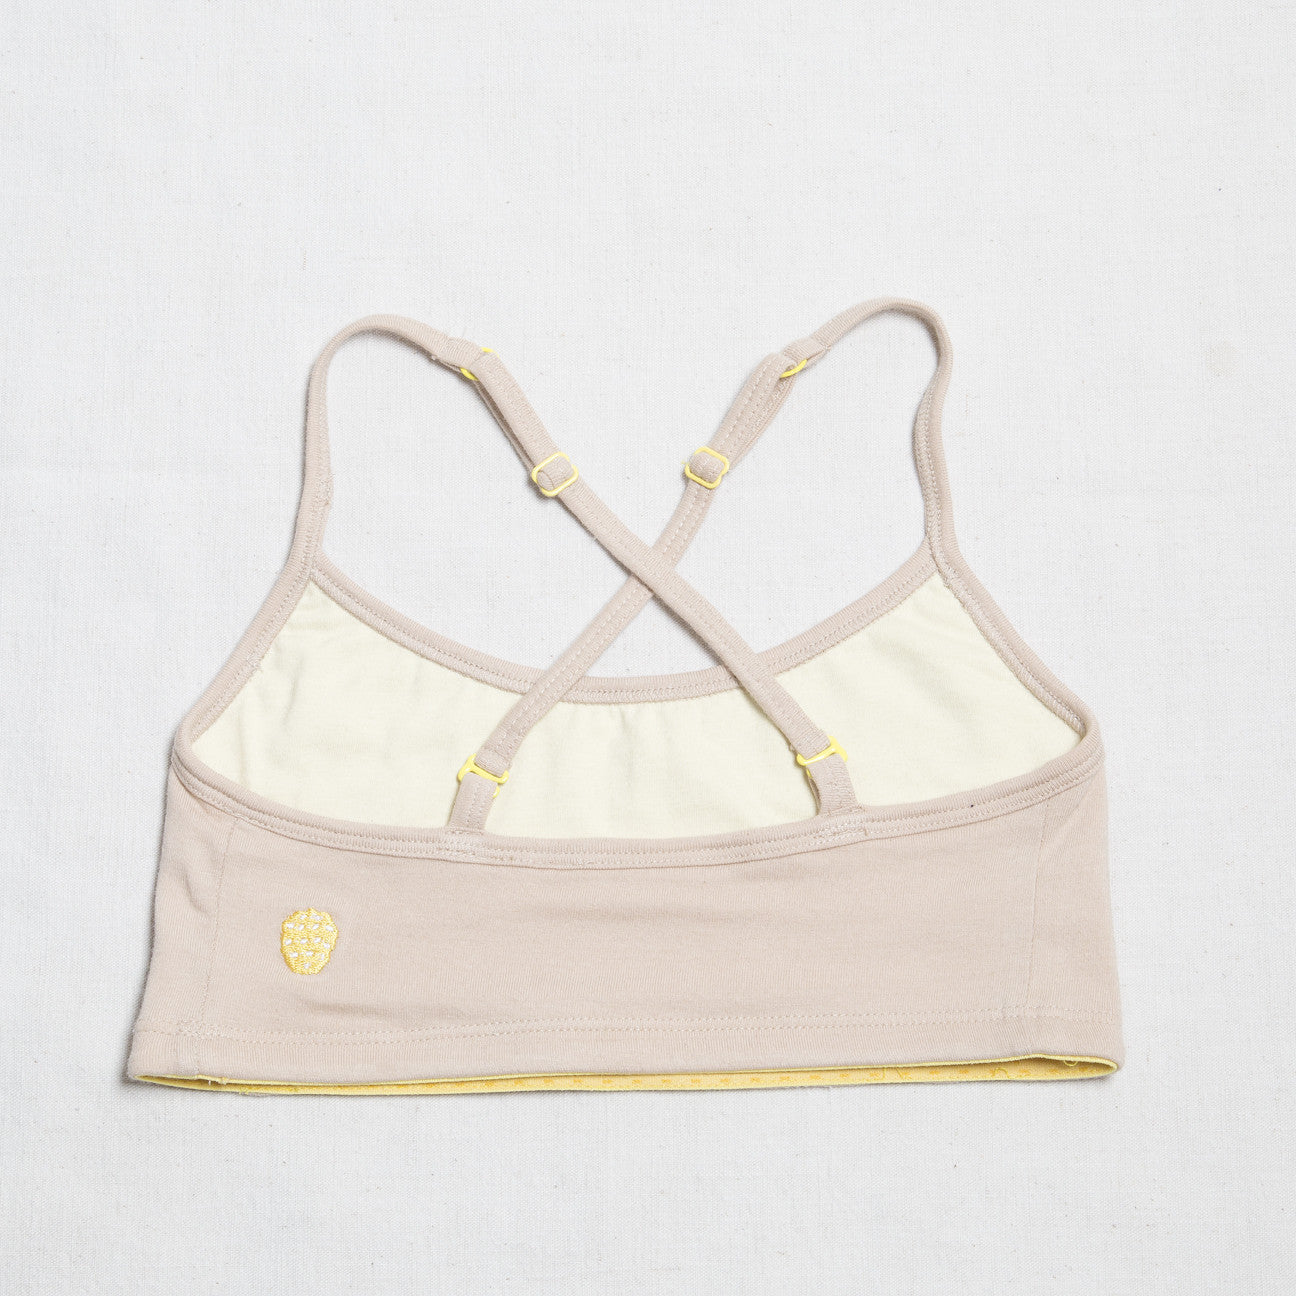  Yellowberry Pipit Bra - Great First Bra for Teens and